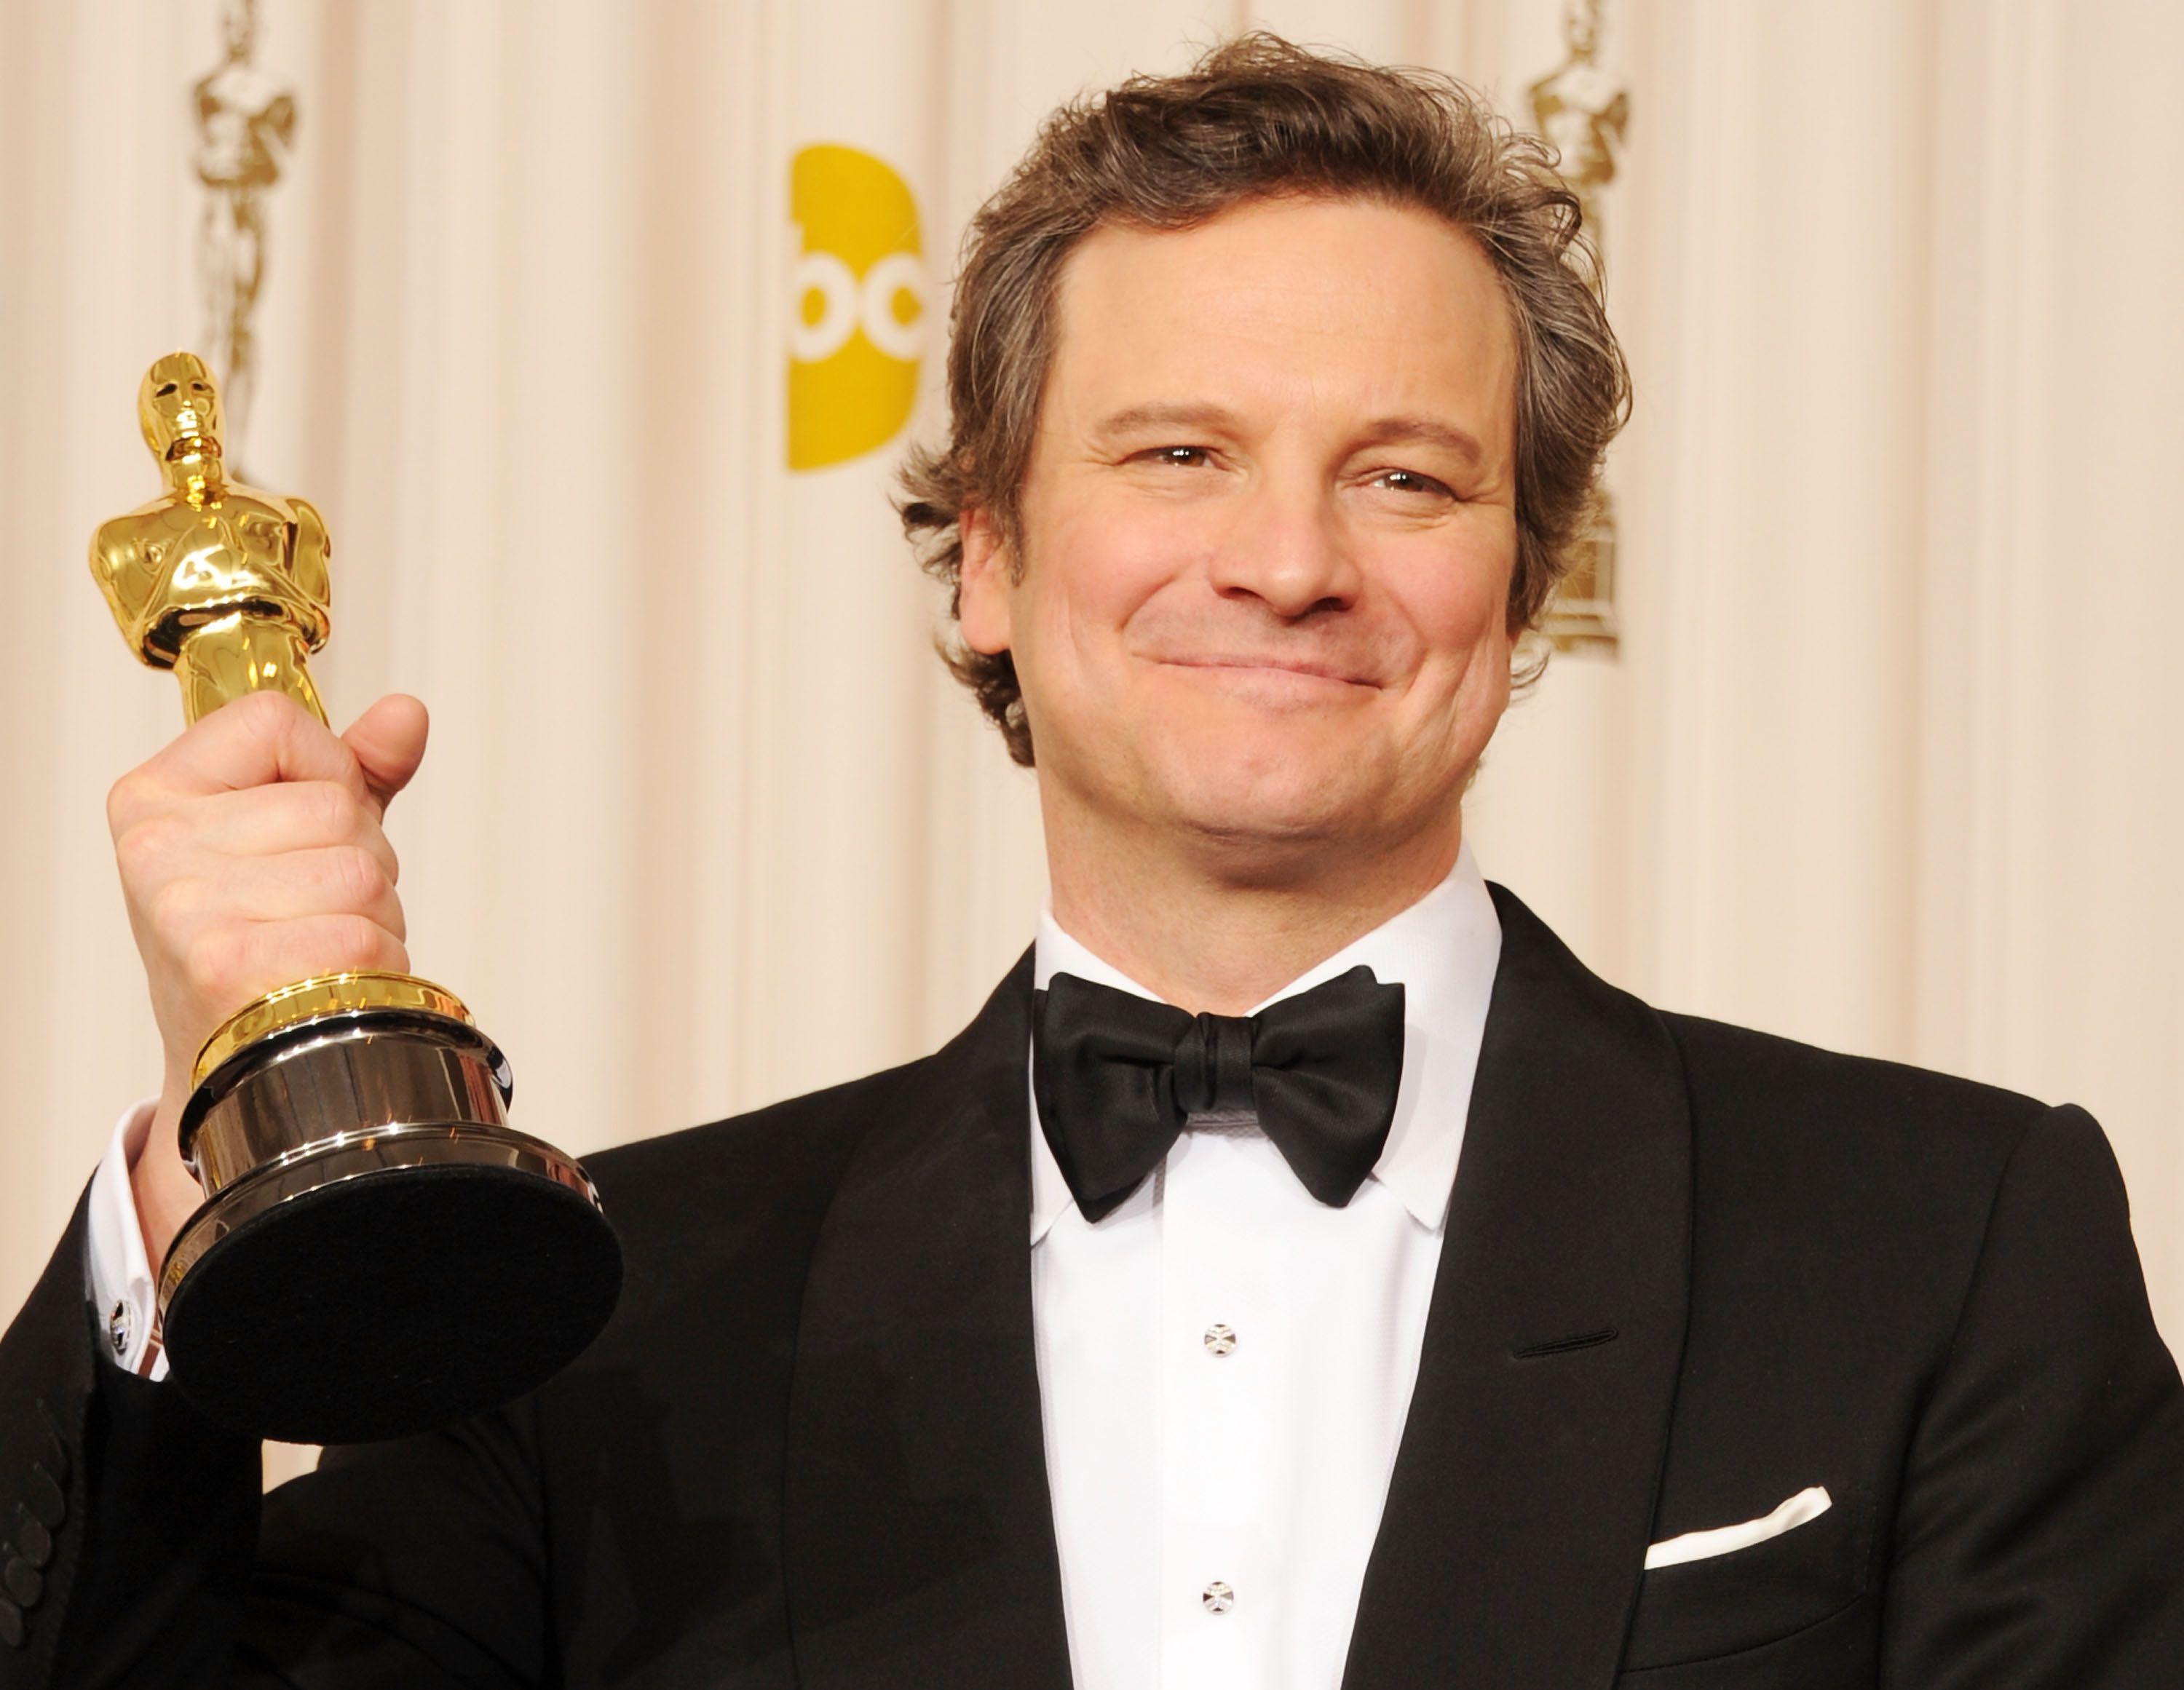 Colin Firth photo, picture, stills, image, wallpaper, gallery